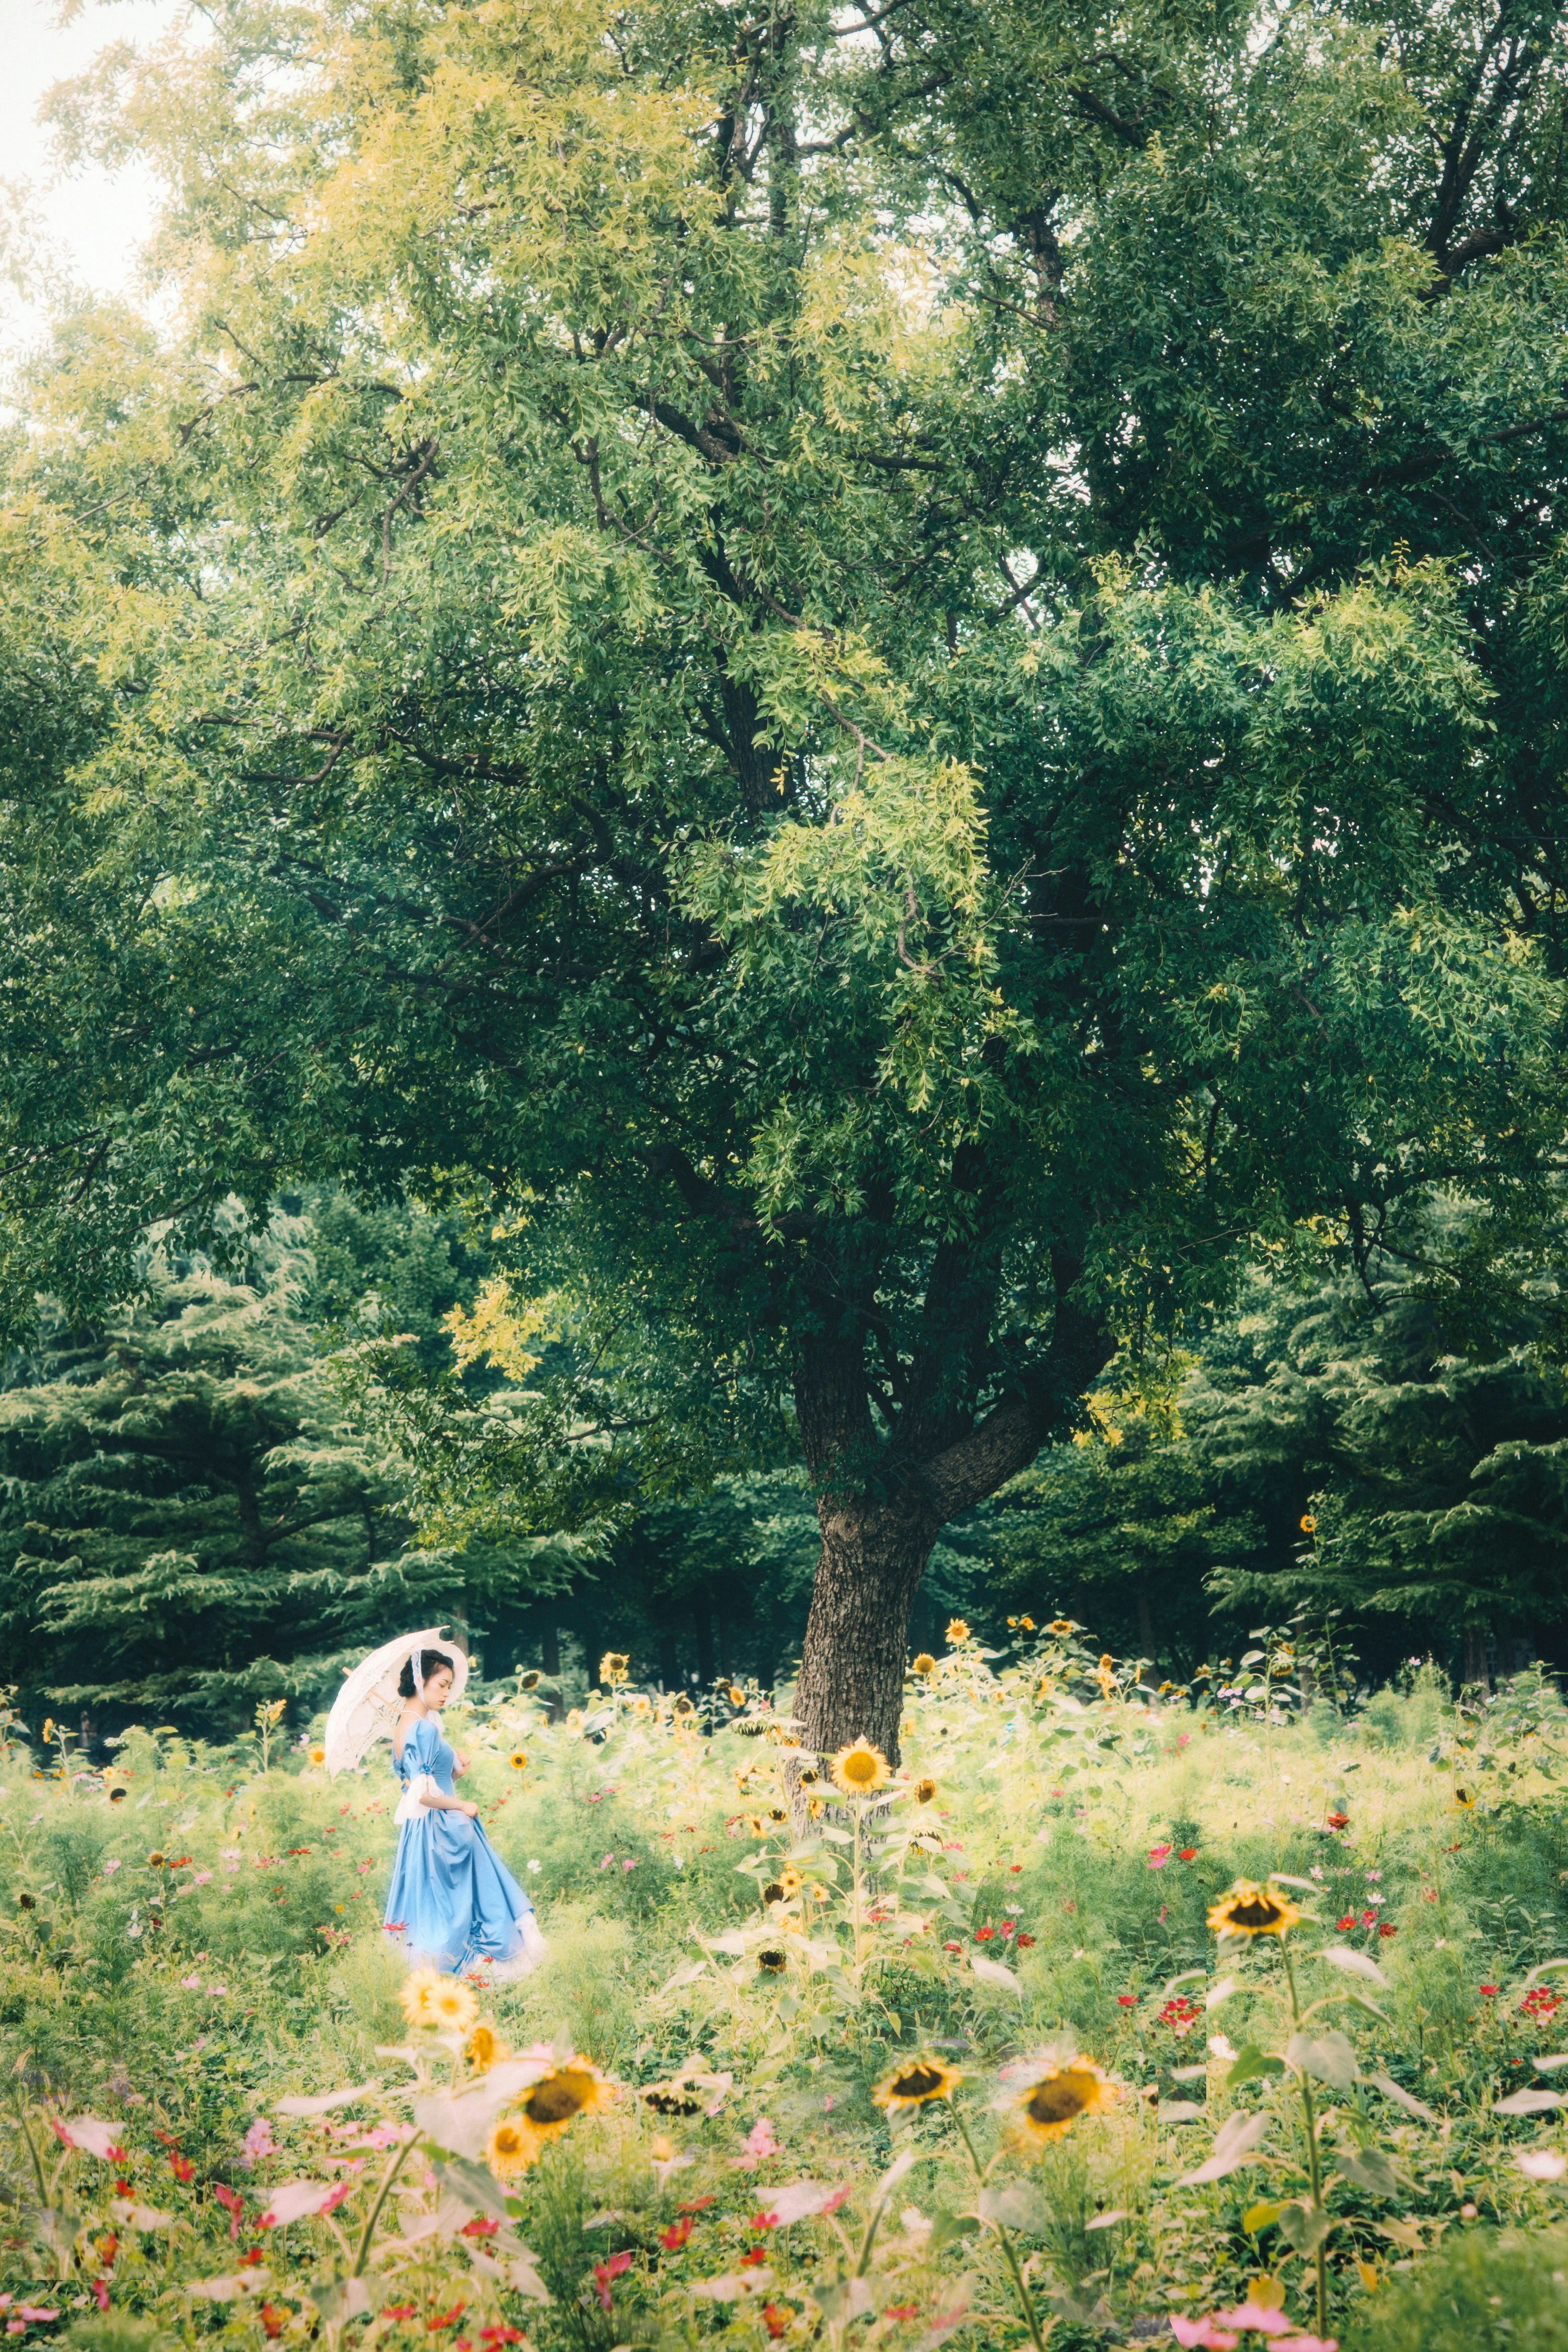 woman in blue dress walking on green grass field during daytime